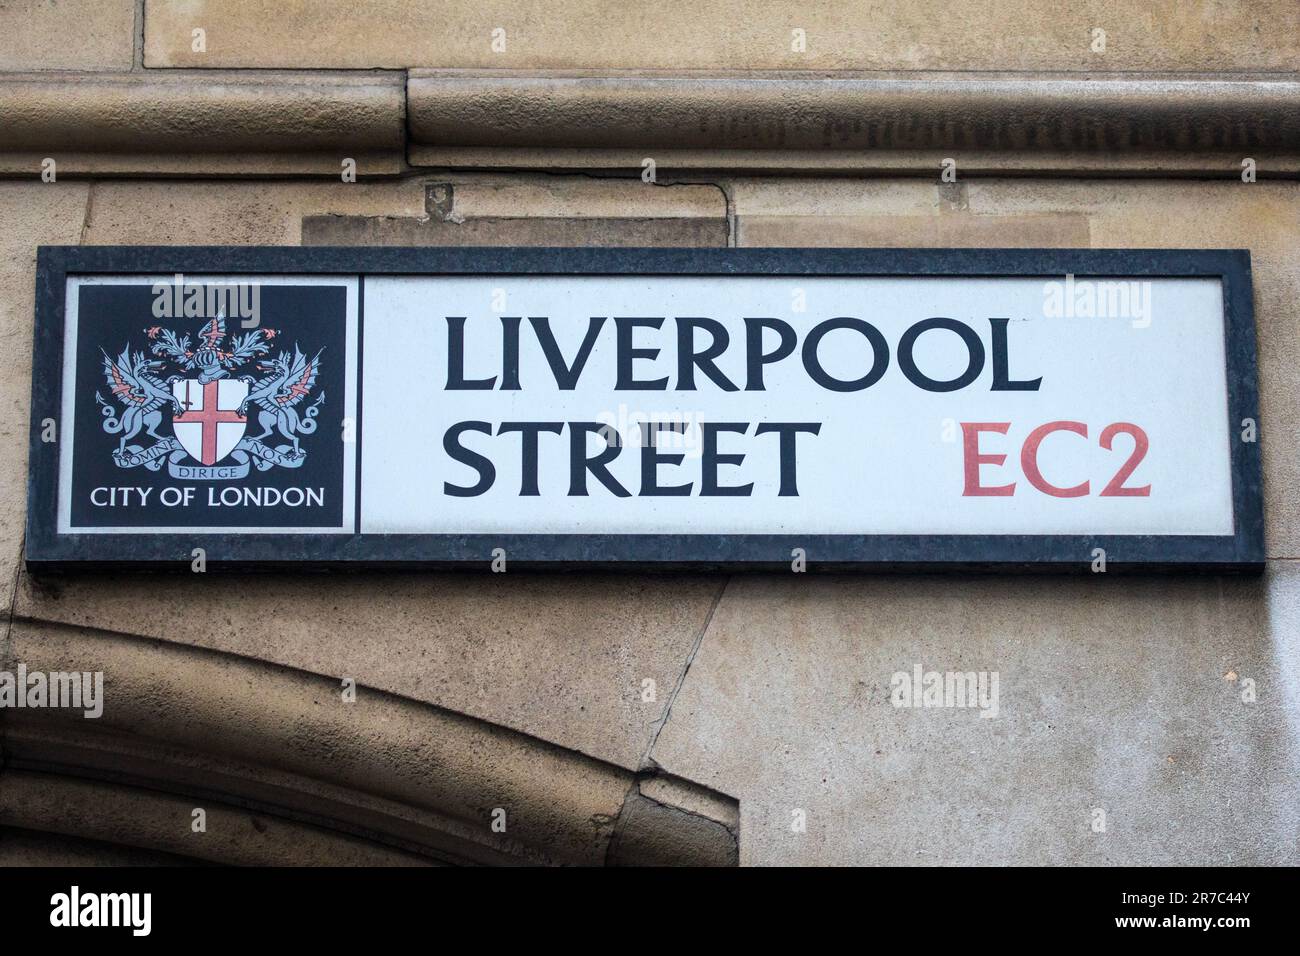 London, UK - March 2nd 2023: A street sign for Liverpool Street in London, UK. Stock Photo